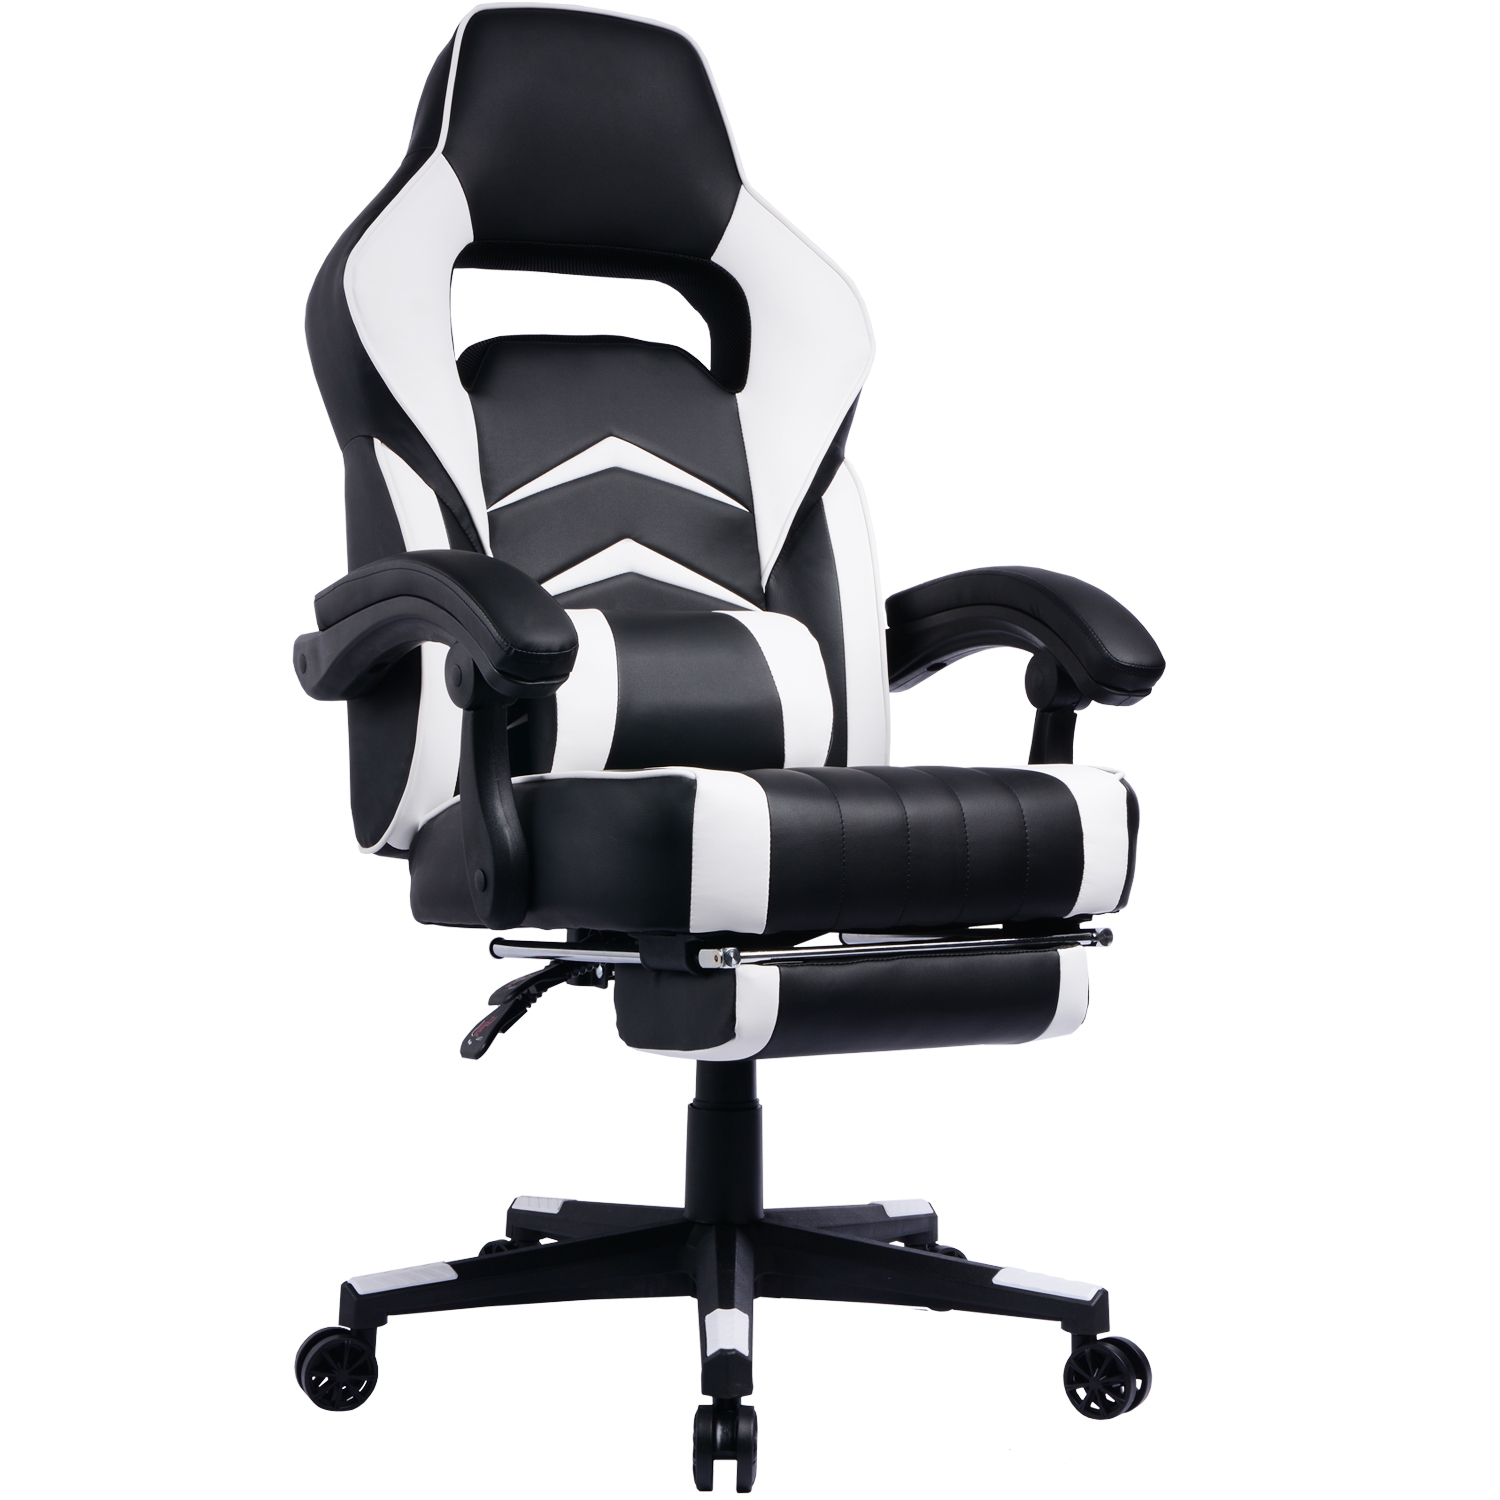 GamingChair Ergonomic PU Leather Racing Gaming Chair with Footrest & Reclining Backrest (White)